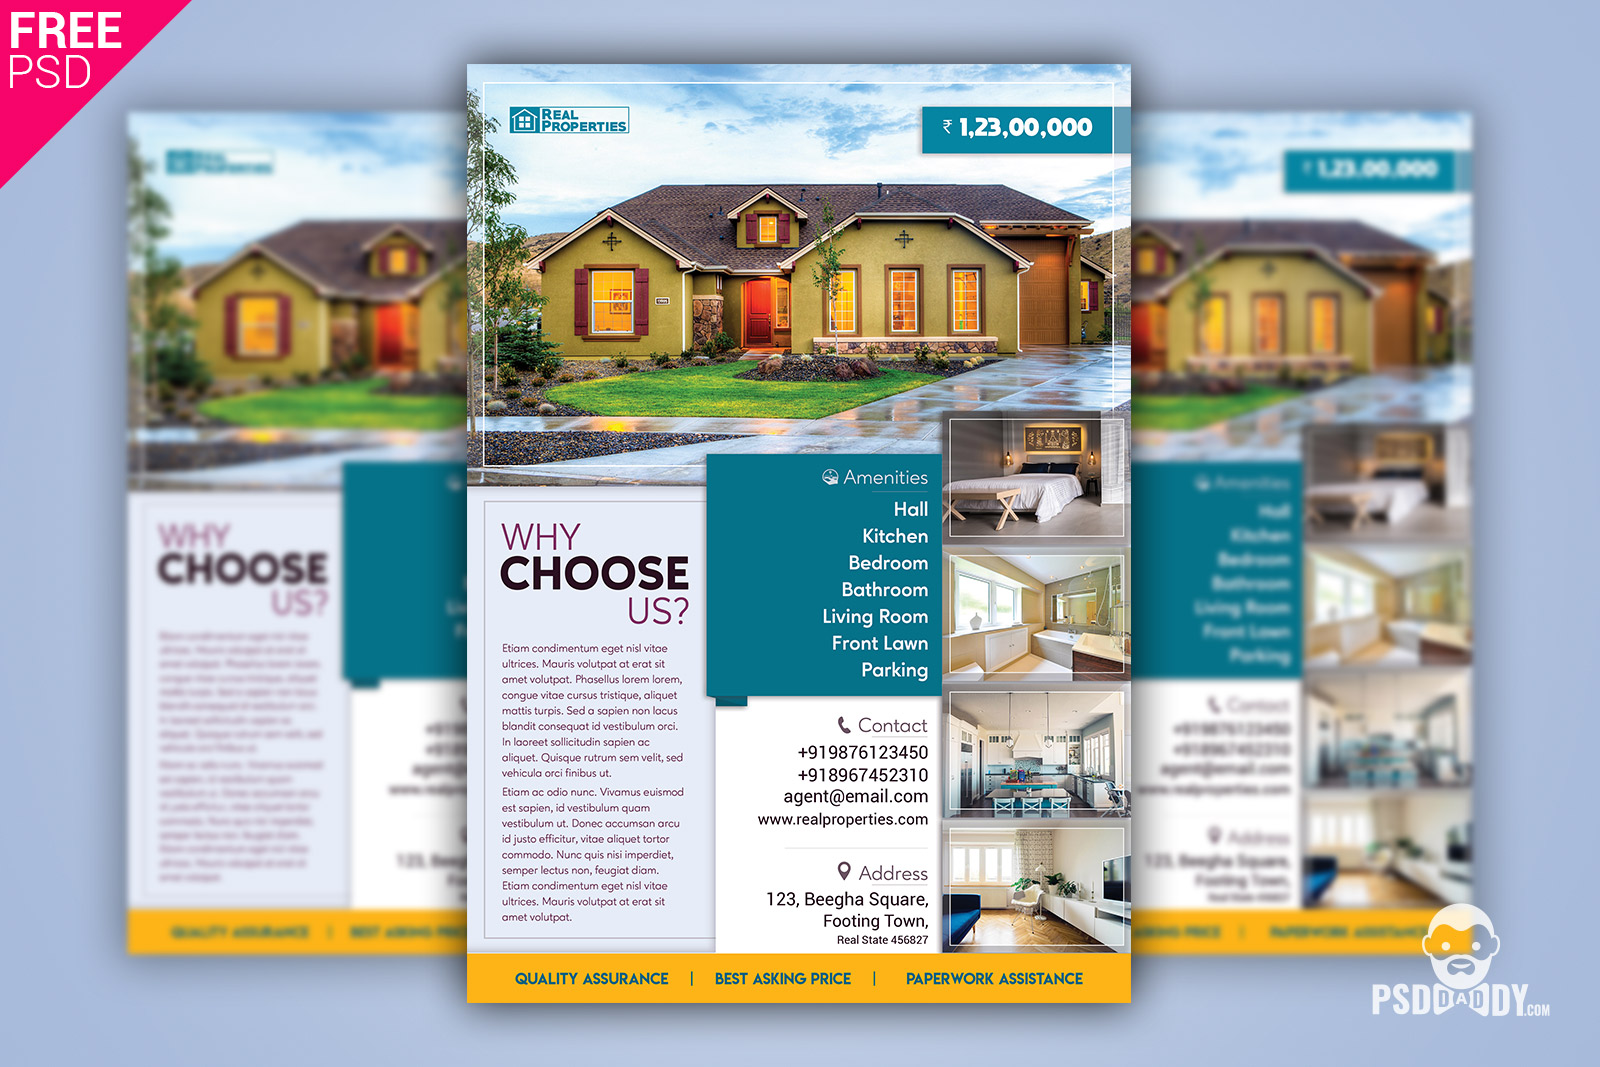 Real Estate Flyer + Social Media Free PSD Template  PsdDaddy.com Pertaining To Real Estate Flyer Template Psd